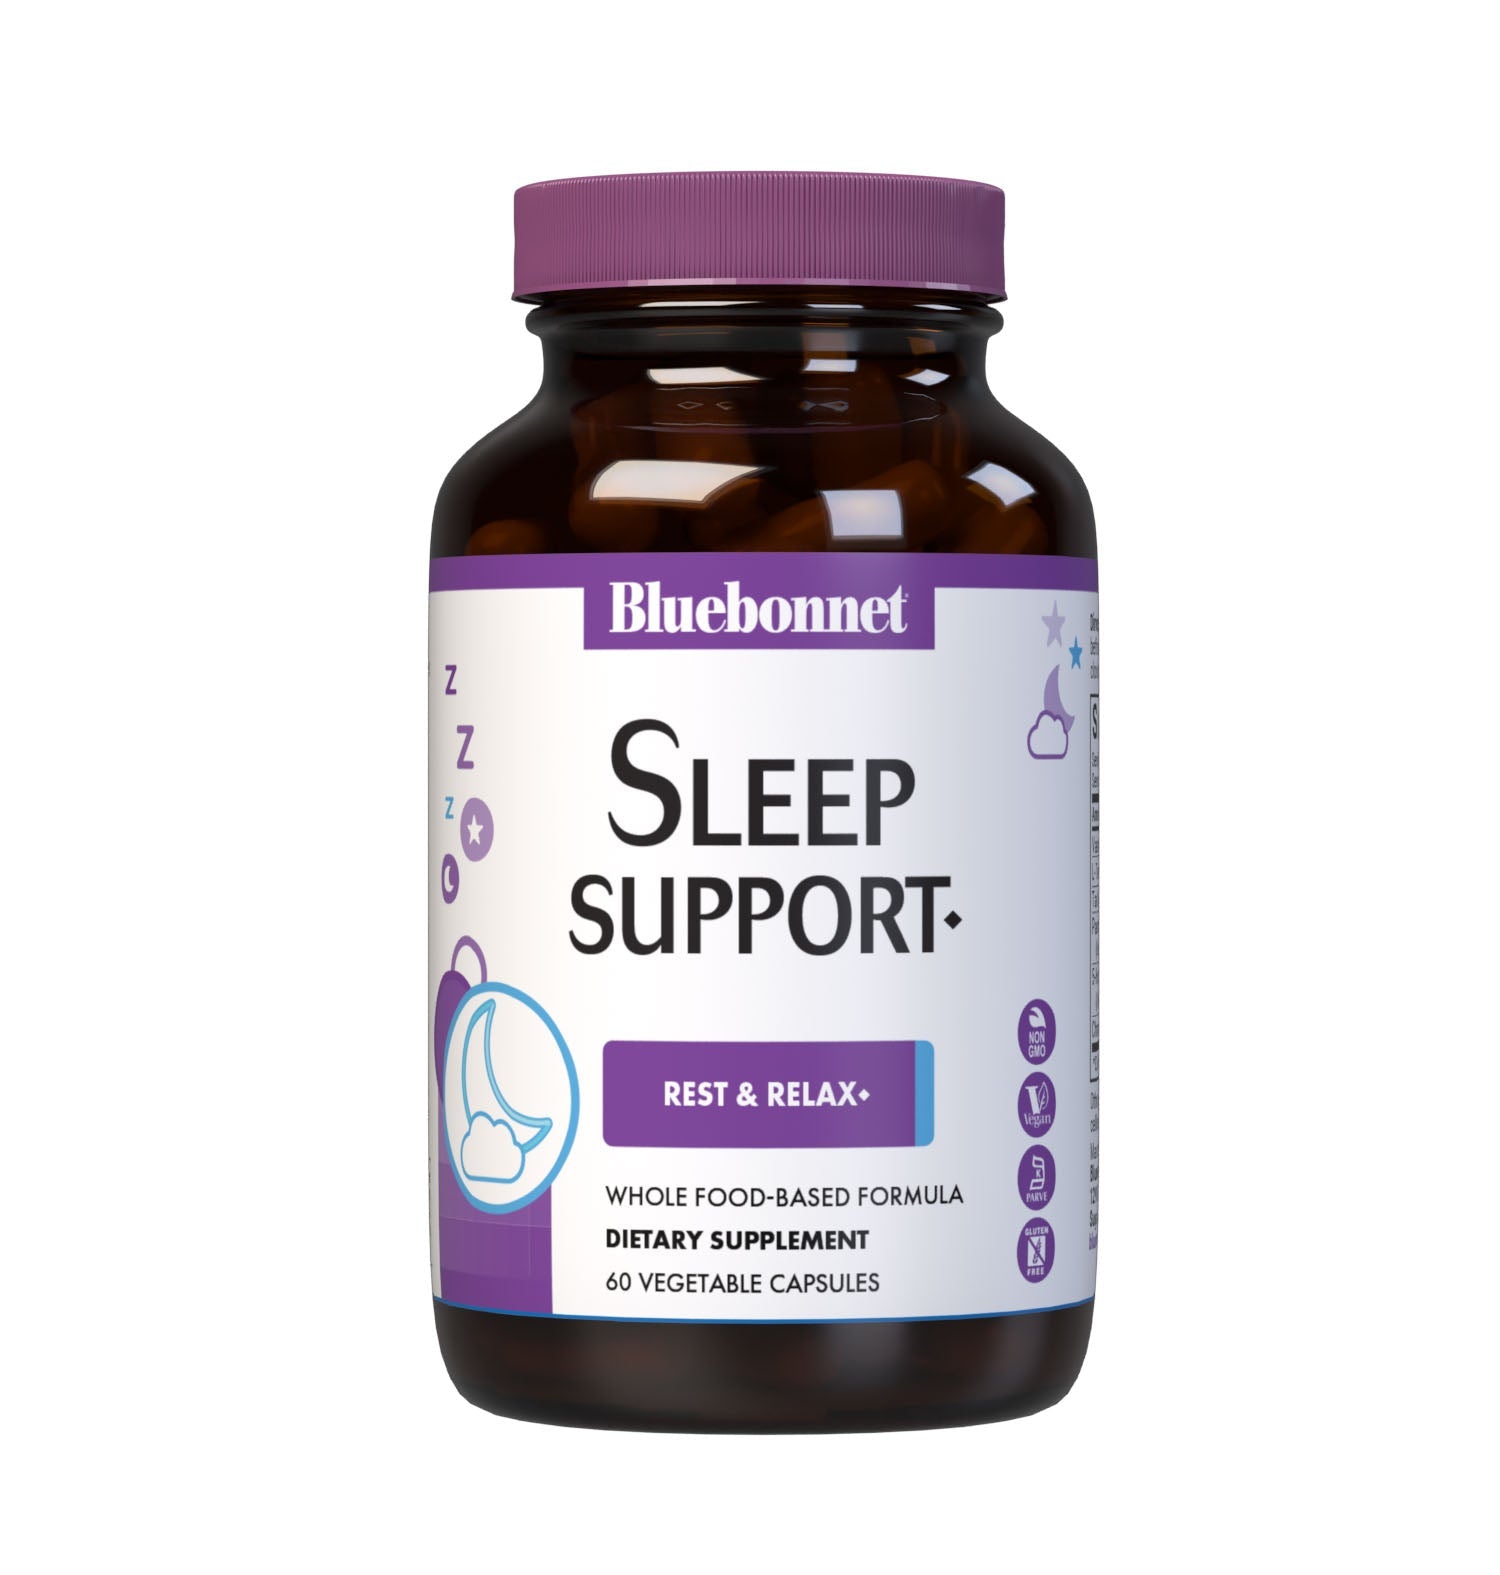 Bluebonnet’s Targeted Choice Sleep Support 30 Vegetable Capsules are specially formulated with a unique blend of whole food nutrients, amino acids and herbal extracts to help promote restful sleep for those affected by occasional sleeplessness. #size_60 count